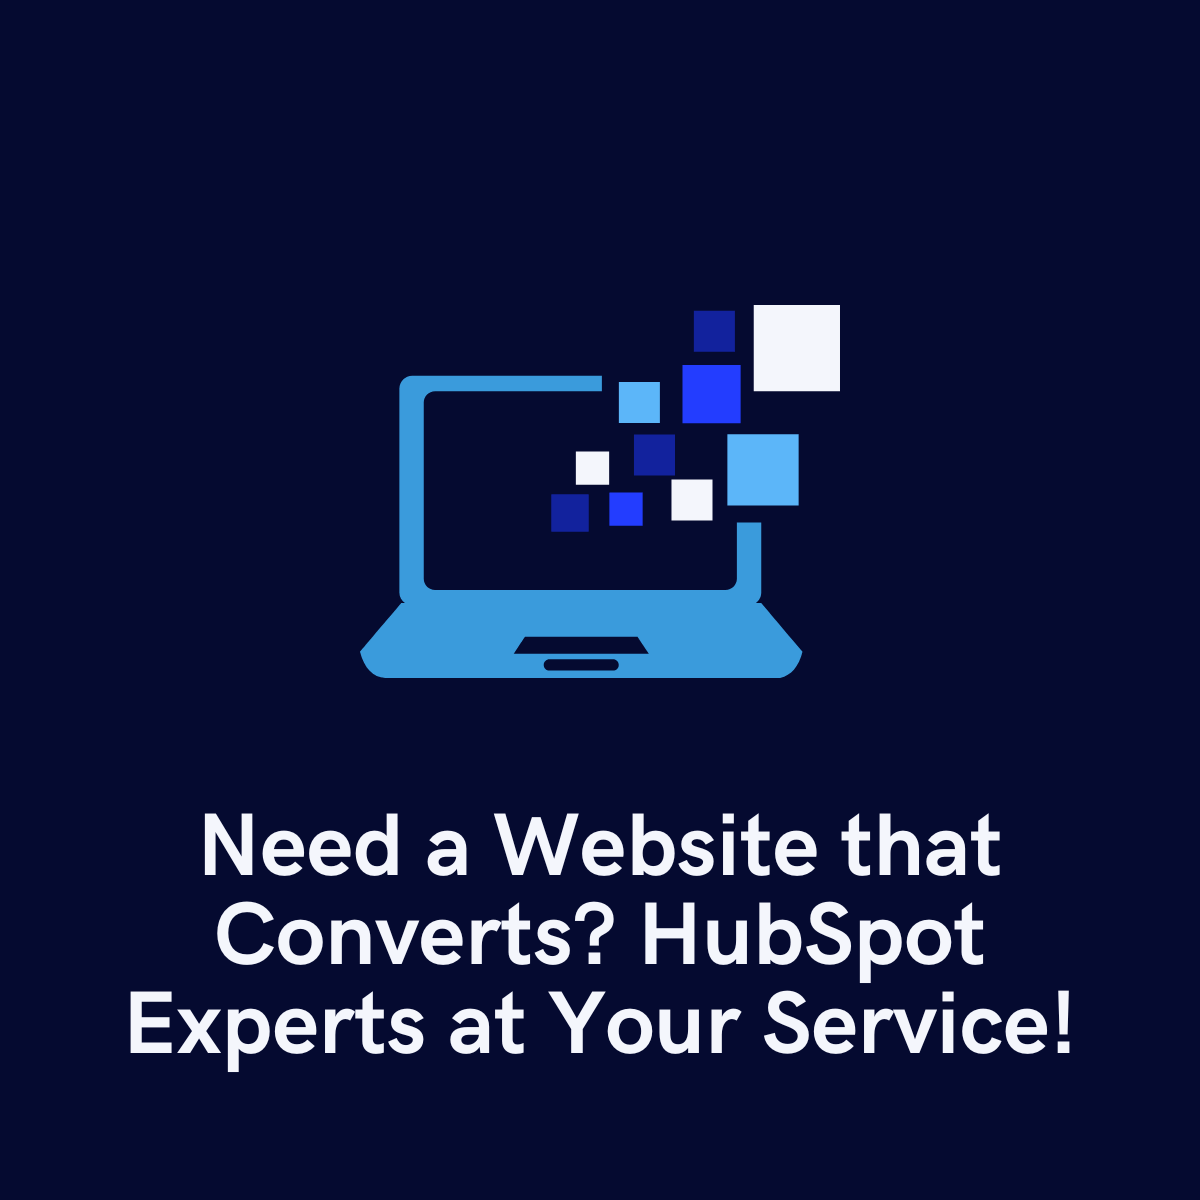 Need a Website that Converts? HubSpot Experts at Your Service!